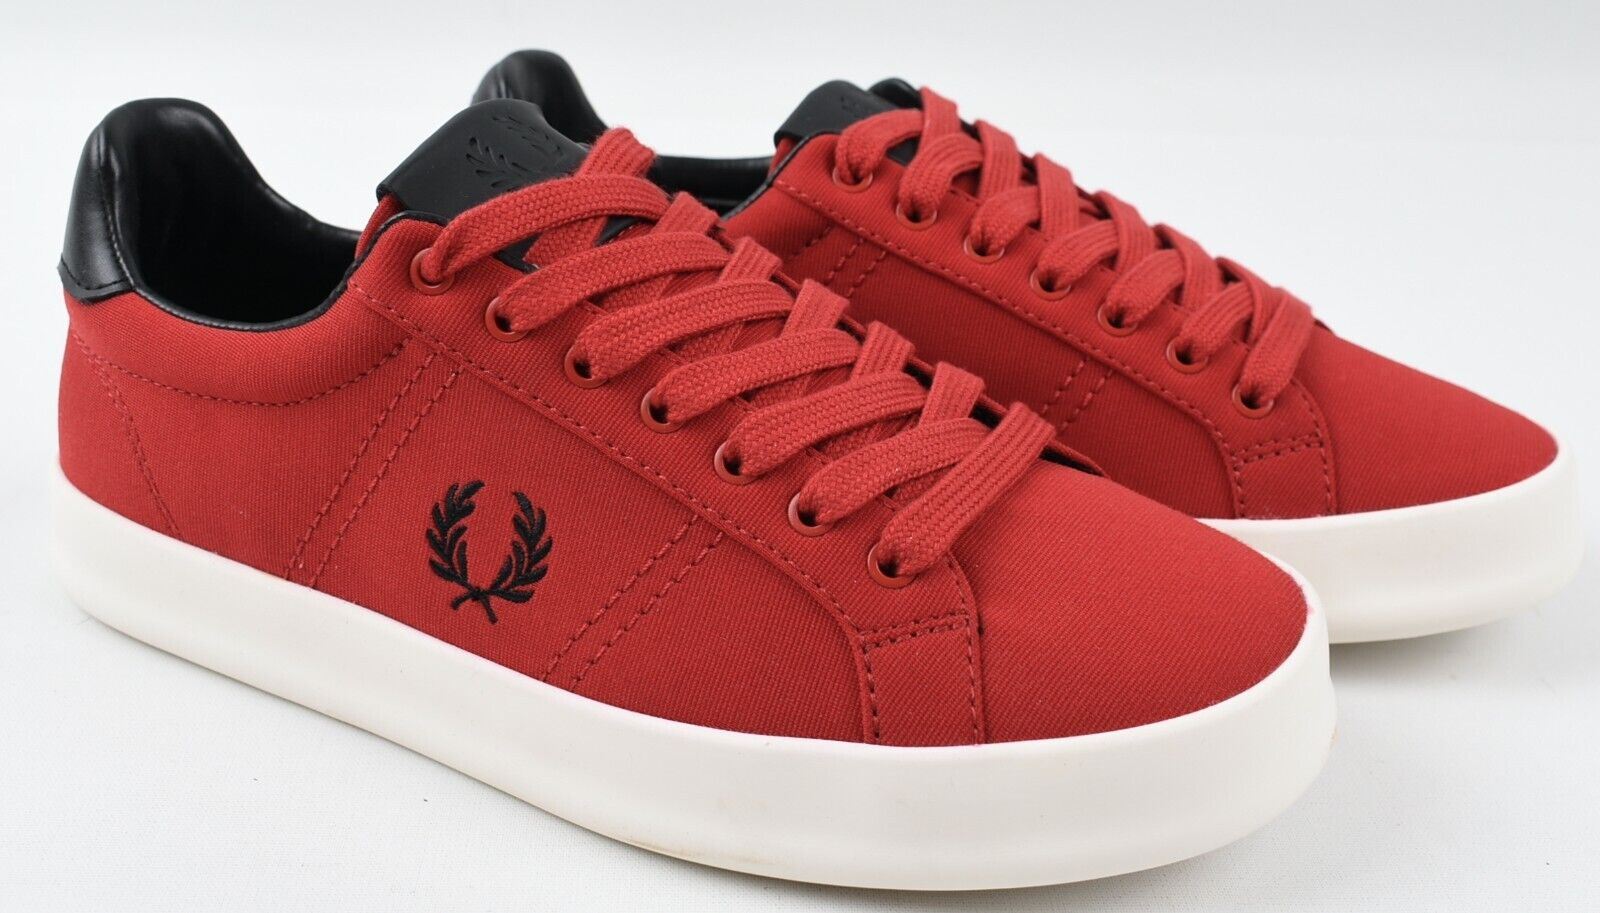 FRED PERRY Womens VULC TRICOT Trainers Sneakers, Scarlet Red, size UK 4 /EU 37